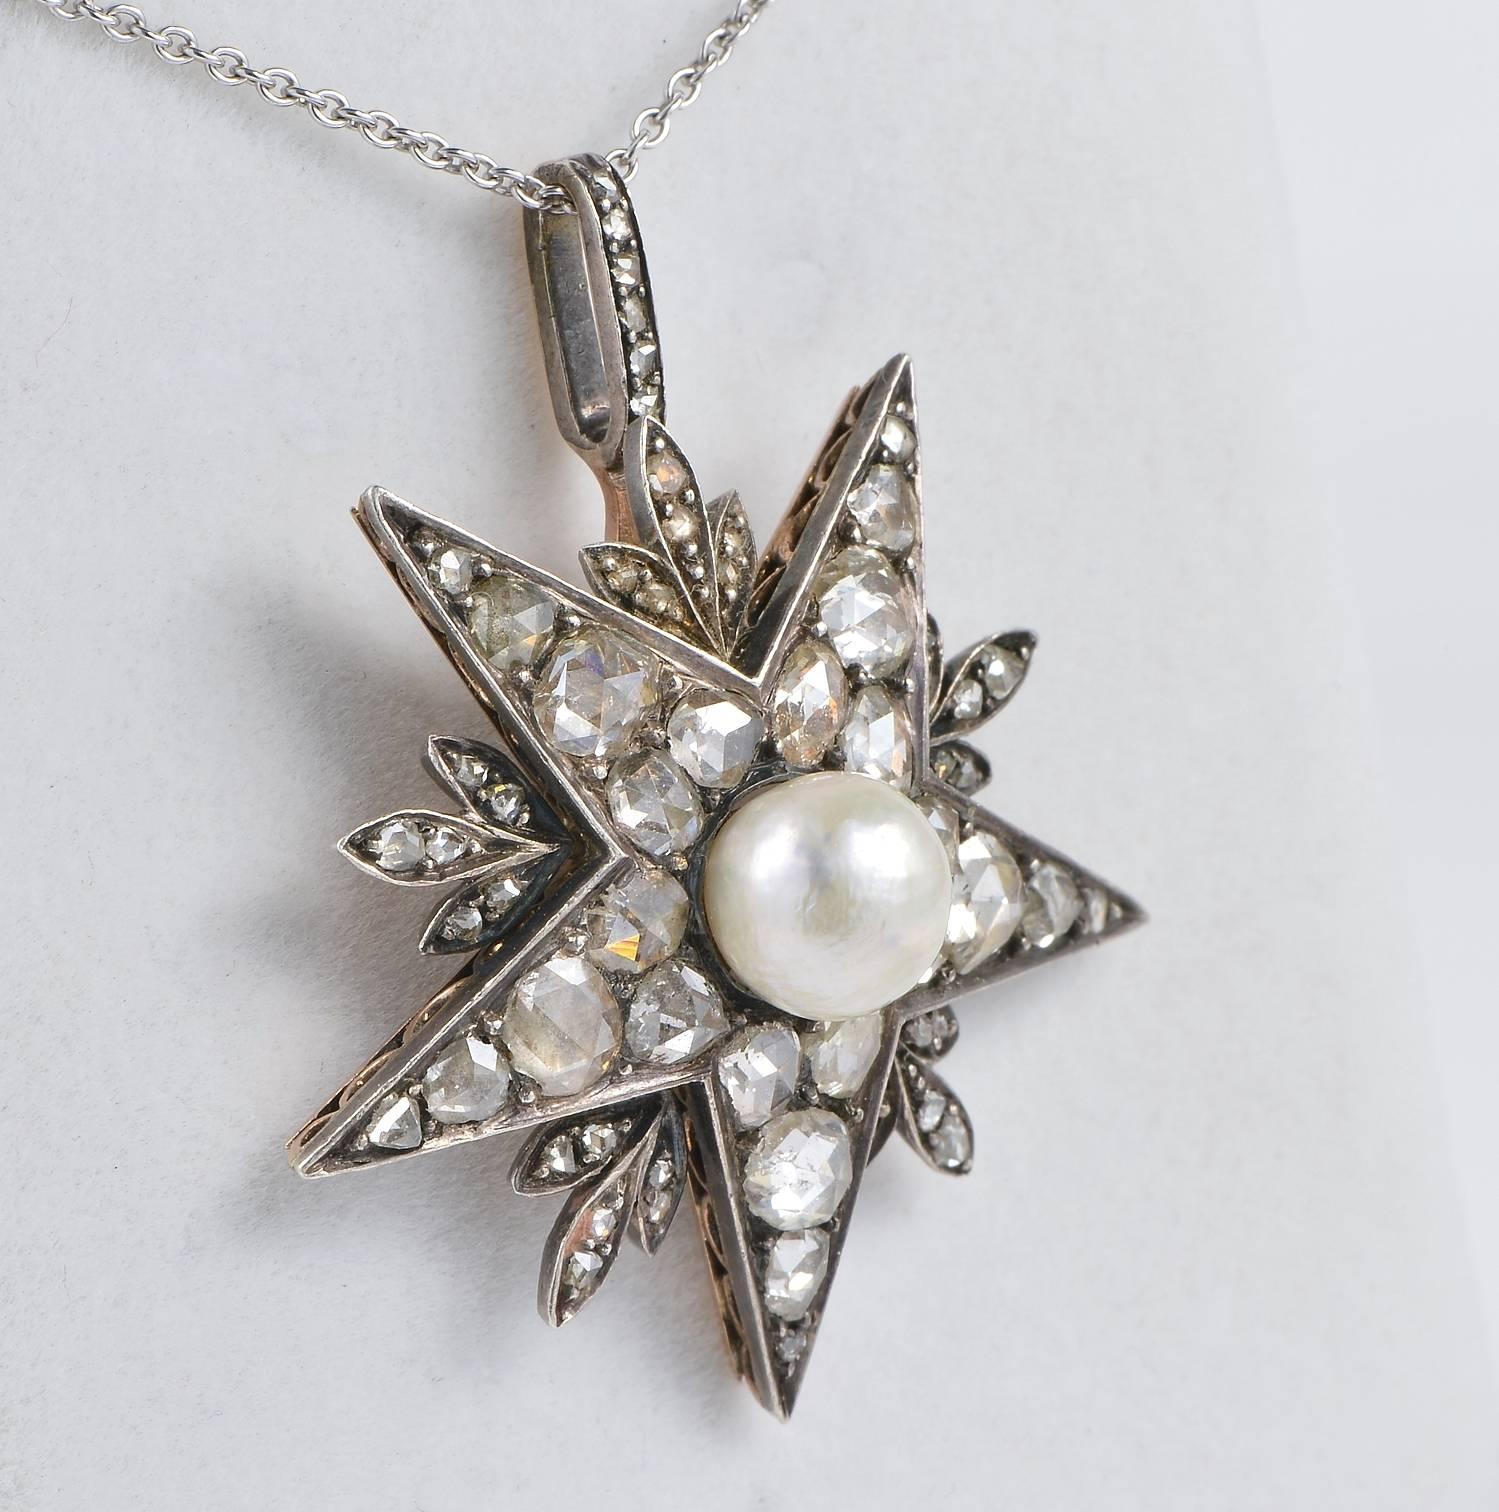 Celestial motif of a large star from the Victorian period, 1860 ca.
centrallys et with a large natural - not nucleated-sea pearl with rose cut Diamondsa as complementary gemstones.
Approx 4.50 ct of Diamonds (measured by the spread); fine quality